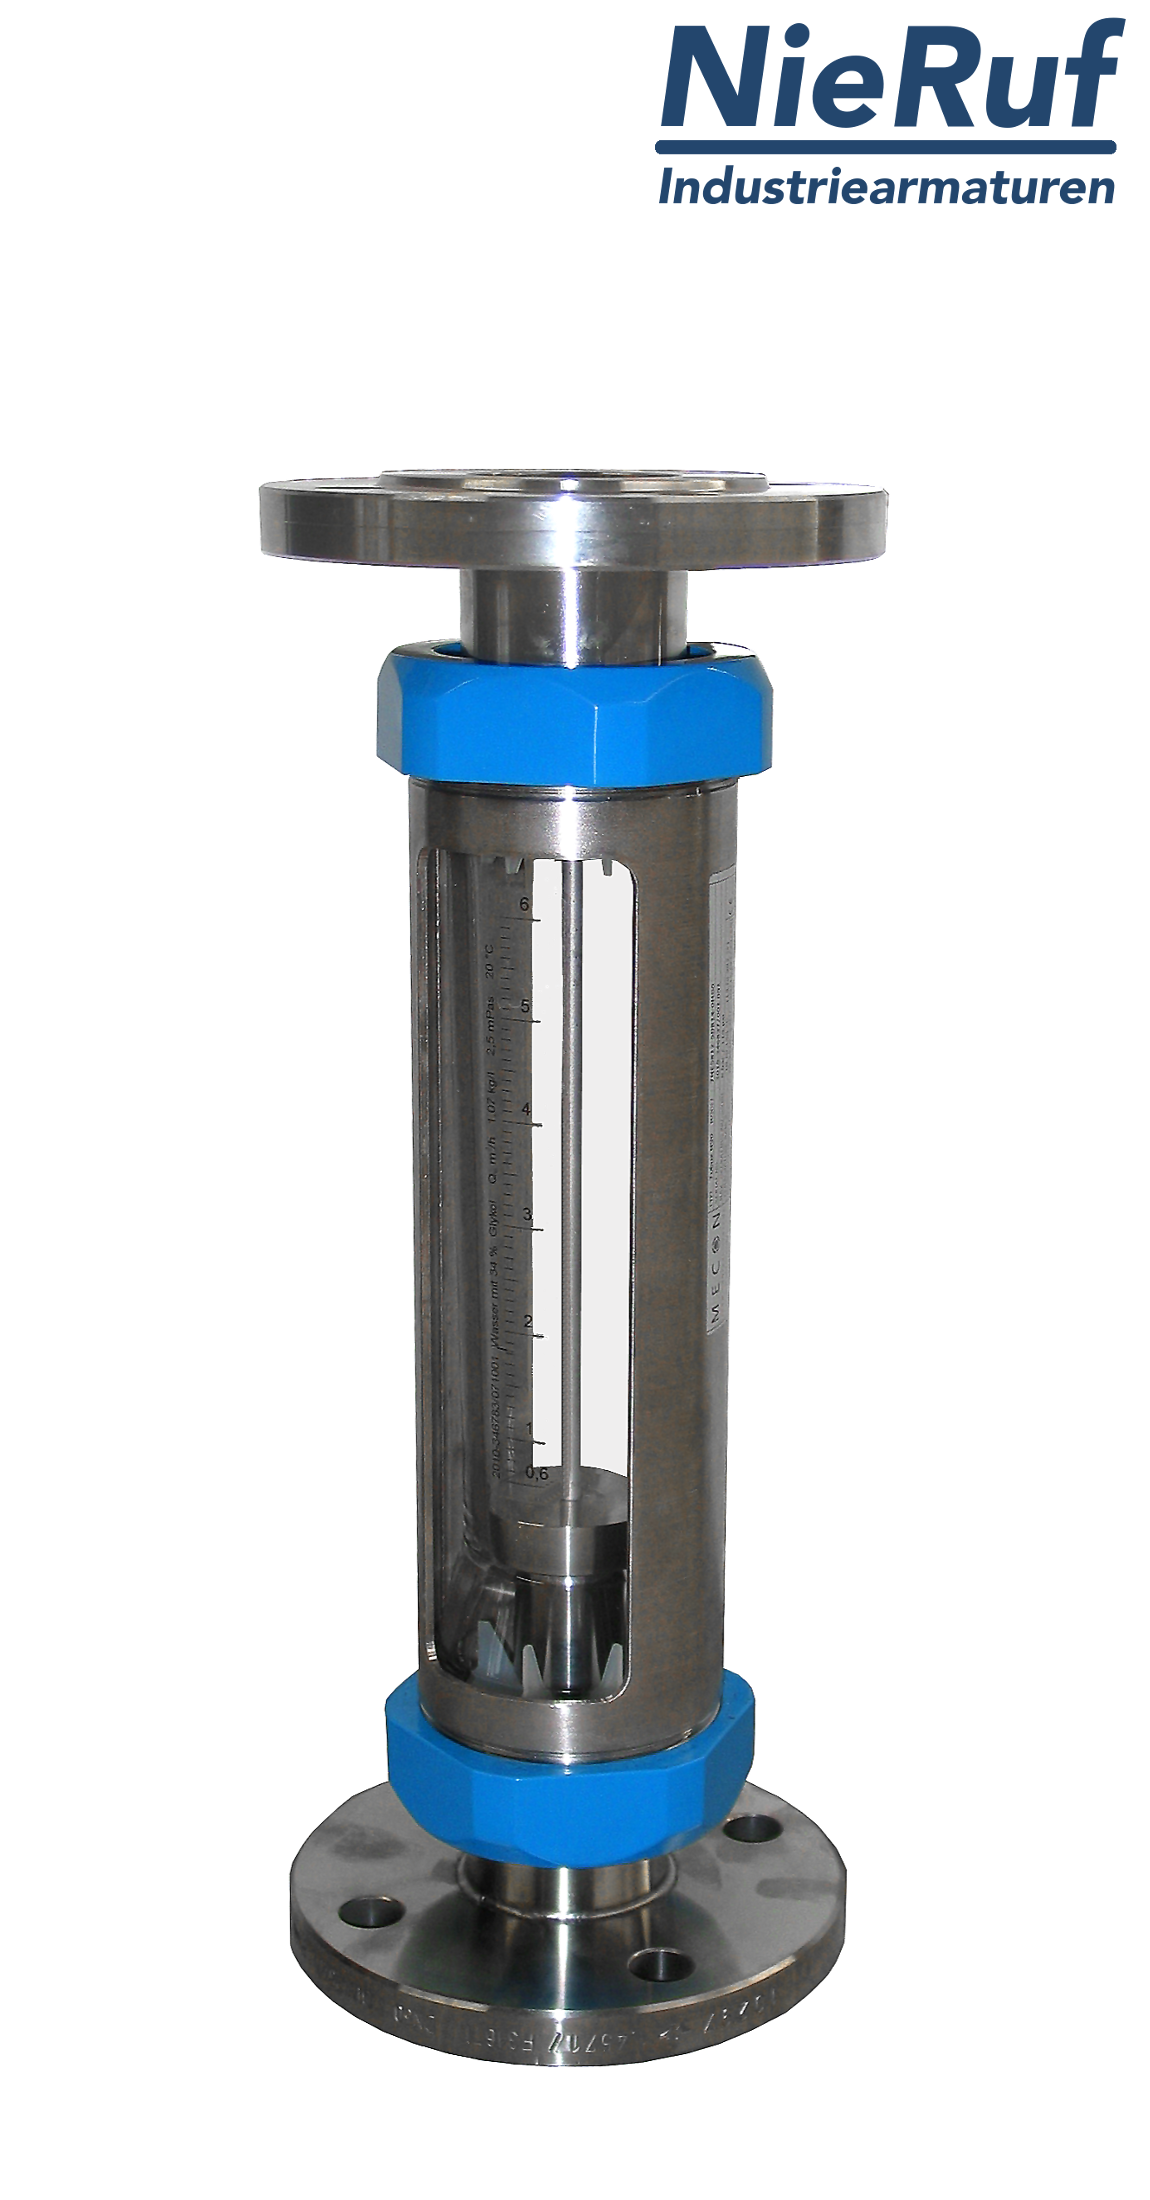 Variable area flowmeter stainless steel + borosilicate flange DN10 8.0 - 80.0 l/h water FKM